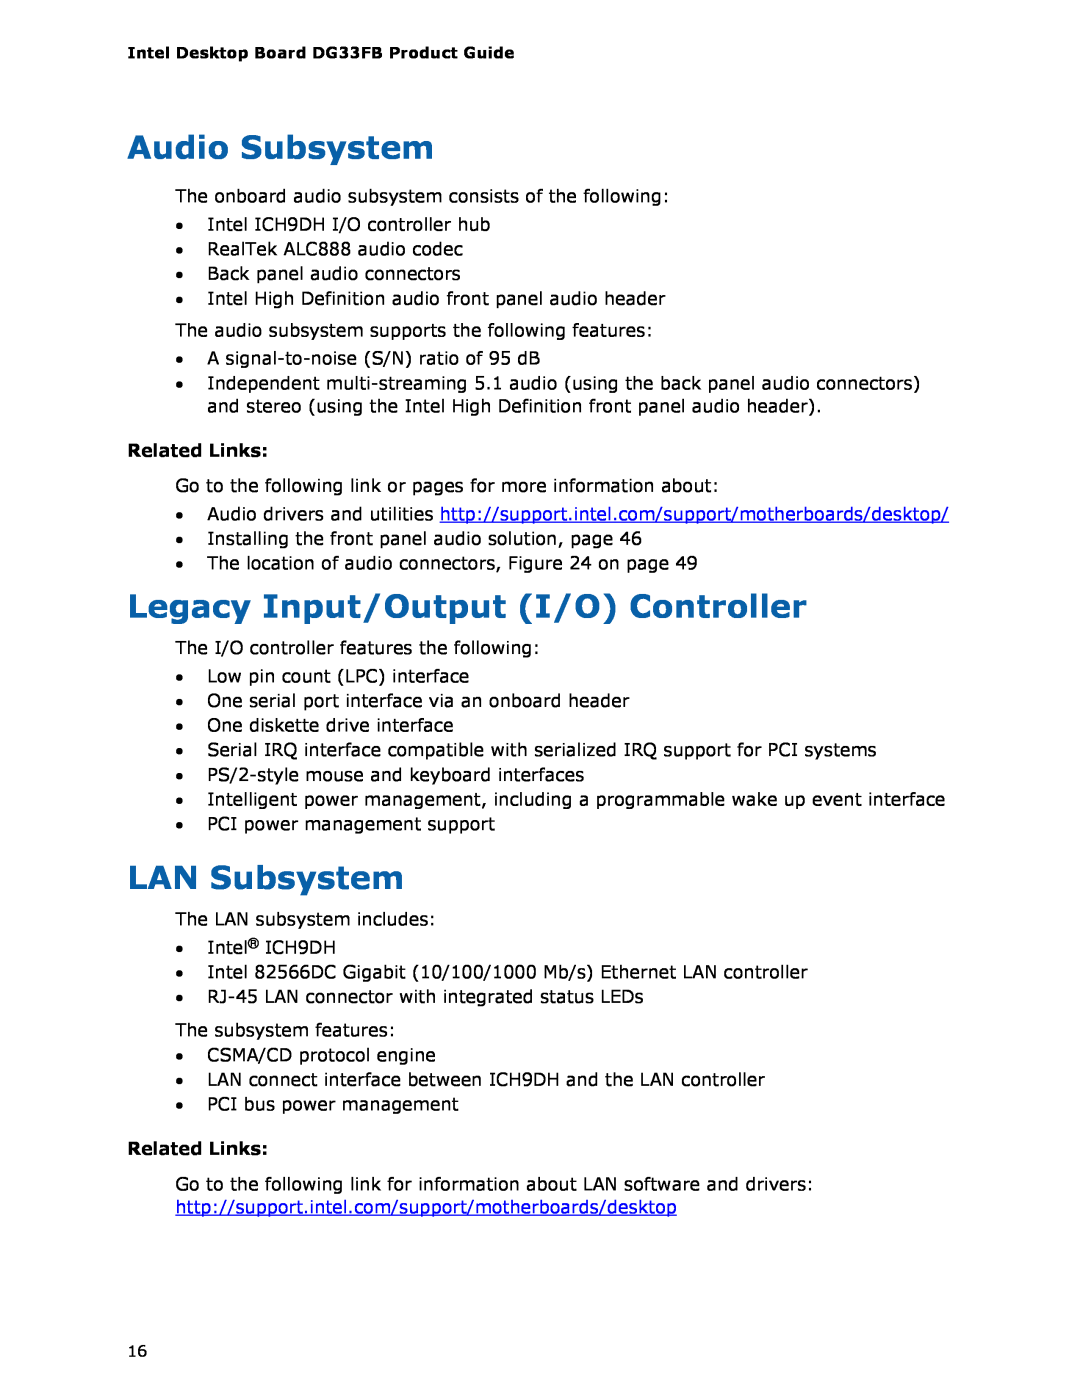 Intel DG33FB manual Audio Subsystem, Legacy Input/Output I/O Controller, LAN Subsystem, Related Links 